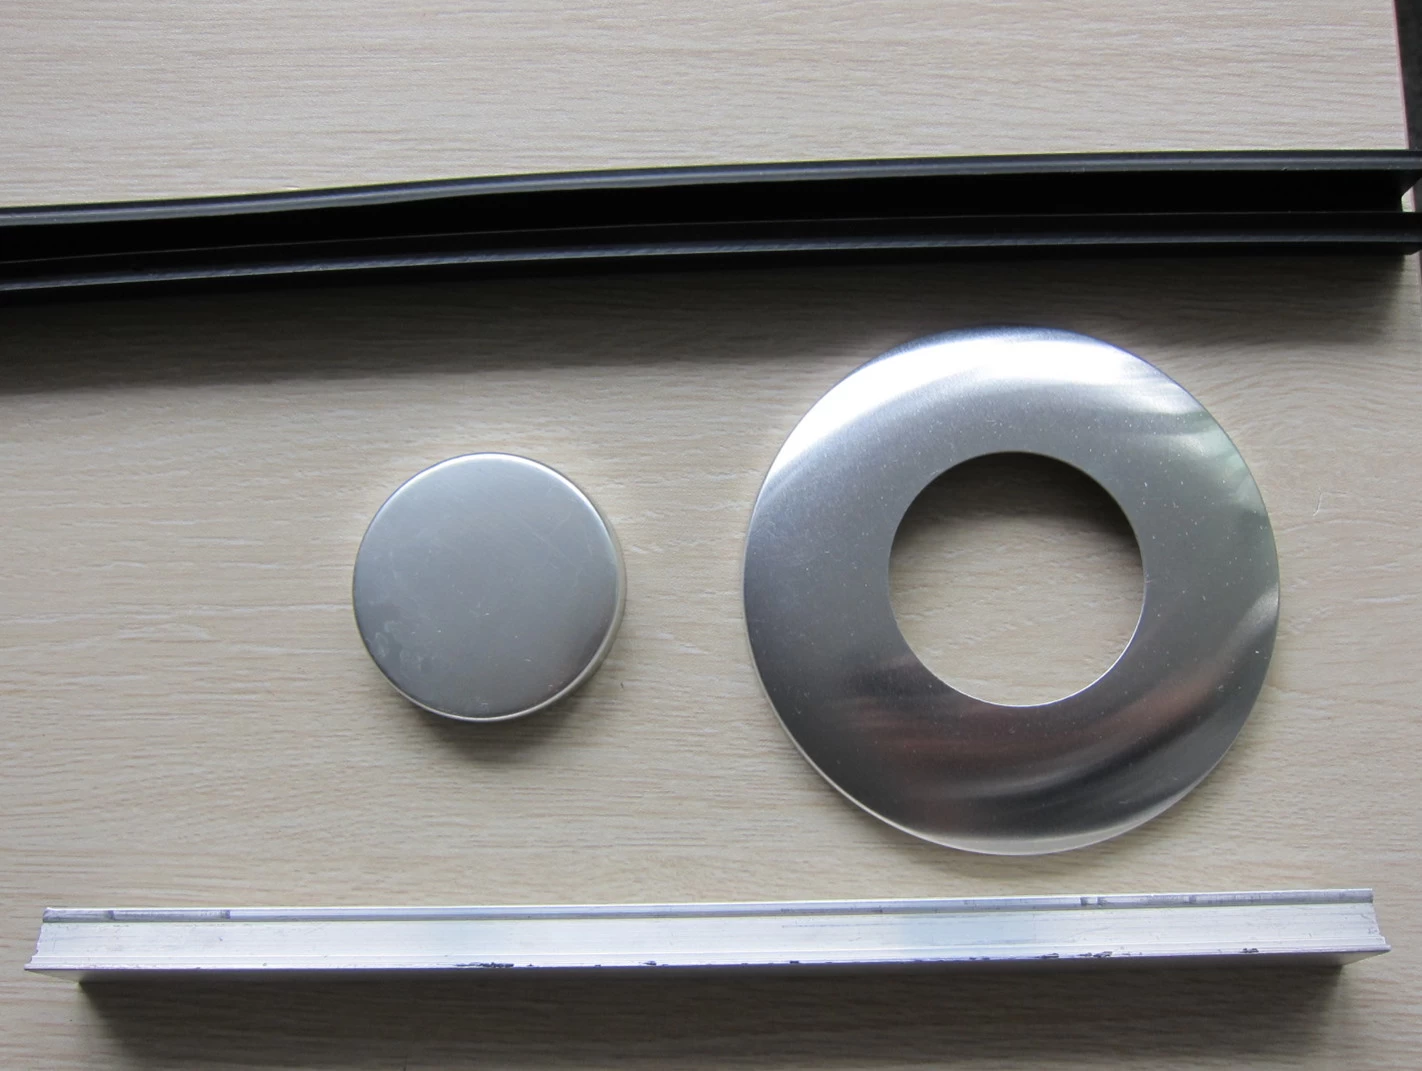 Aluminum profile end cap and base cover for round and square 50x50mm aluminum balustrade posts